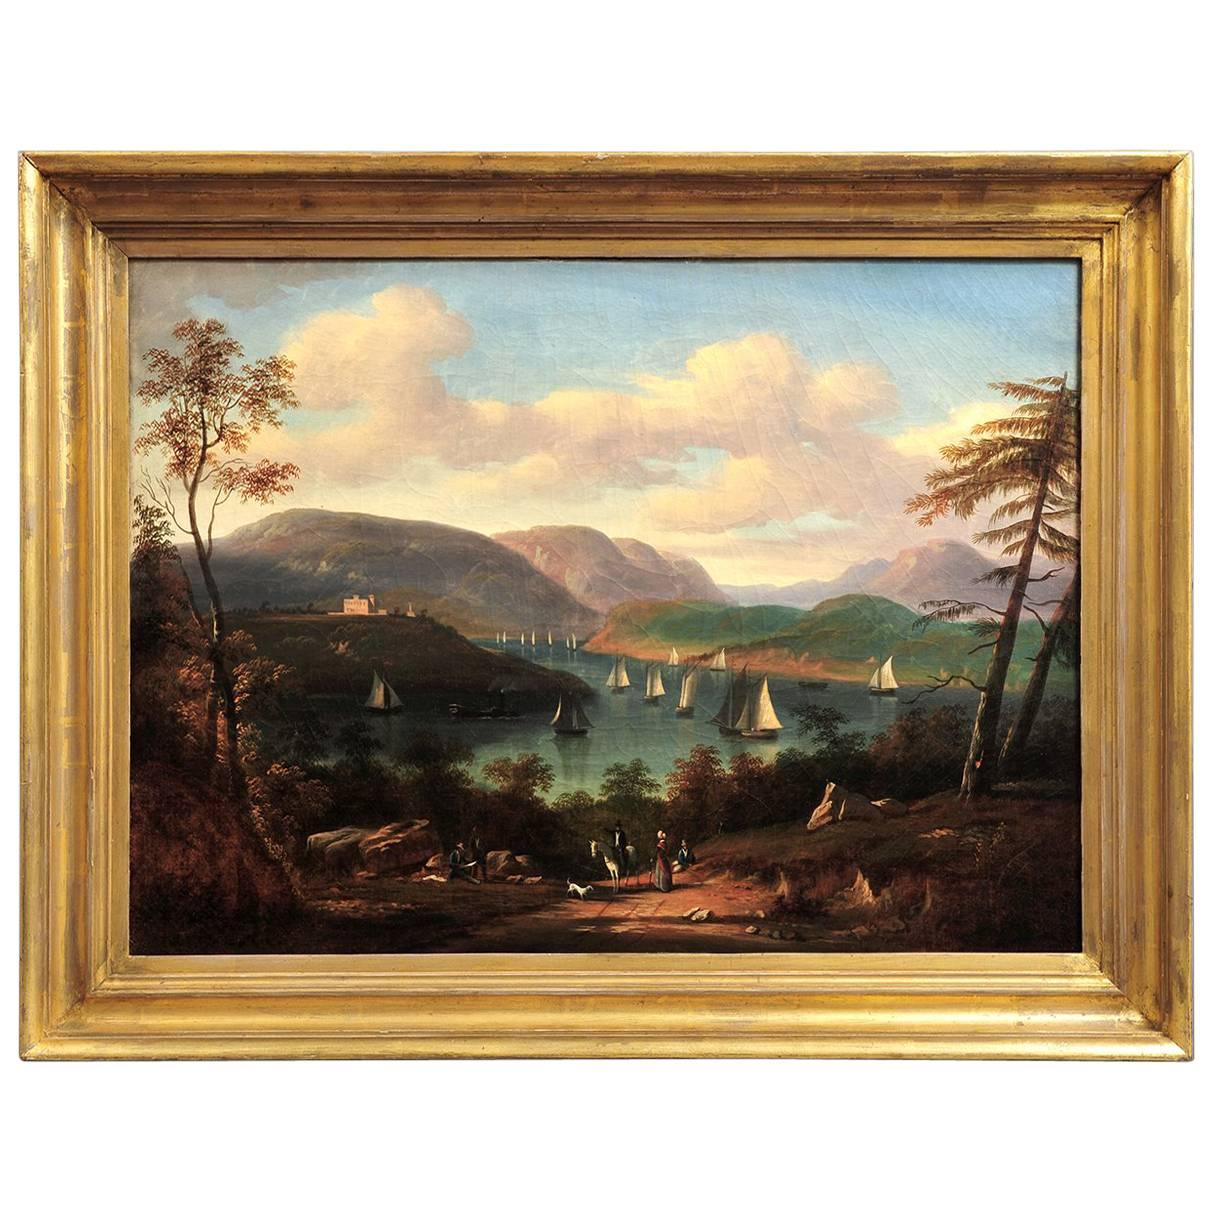 Victor De Grailly "View of the Hudson River at West Point" circa 1840-1850